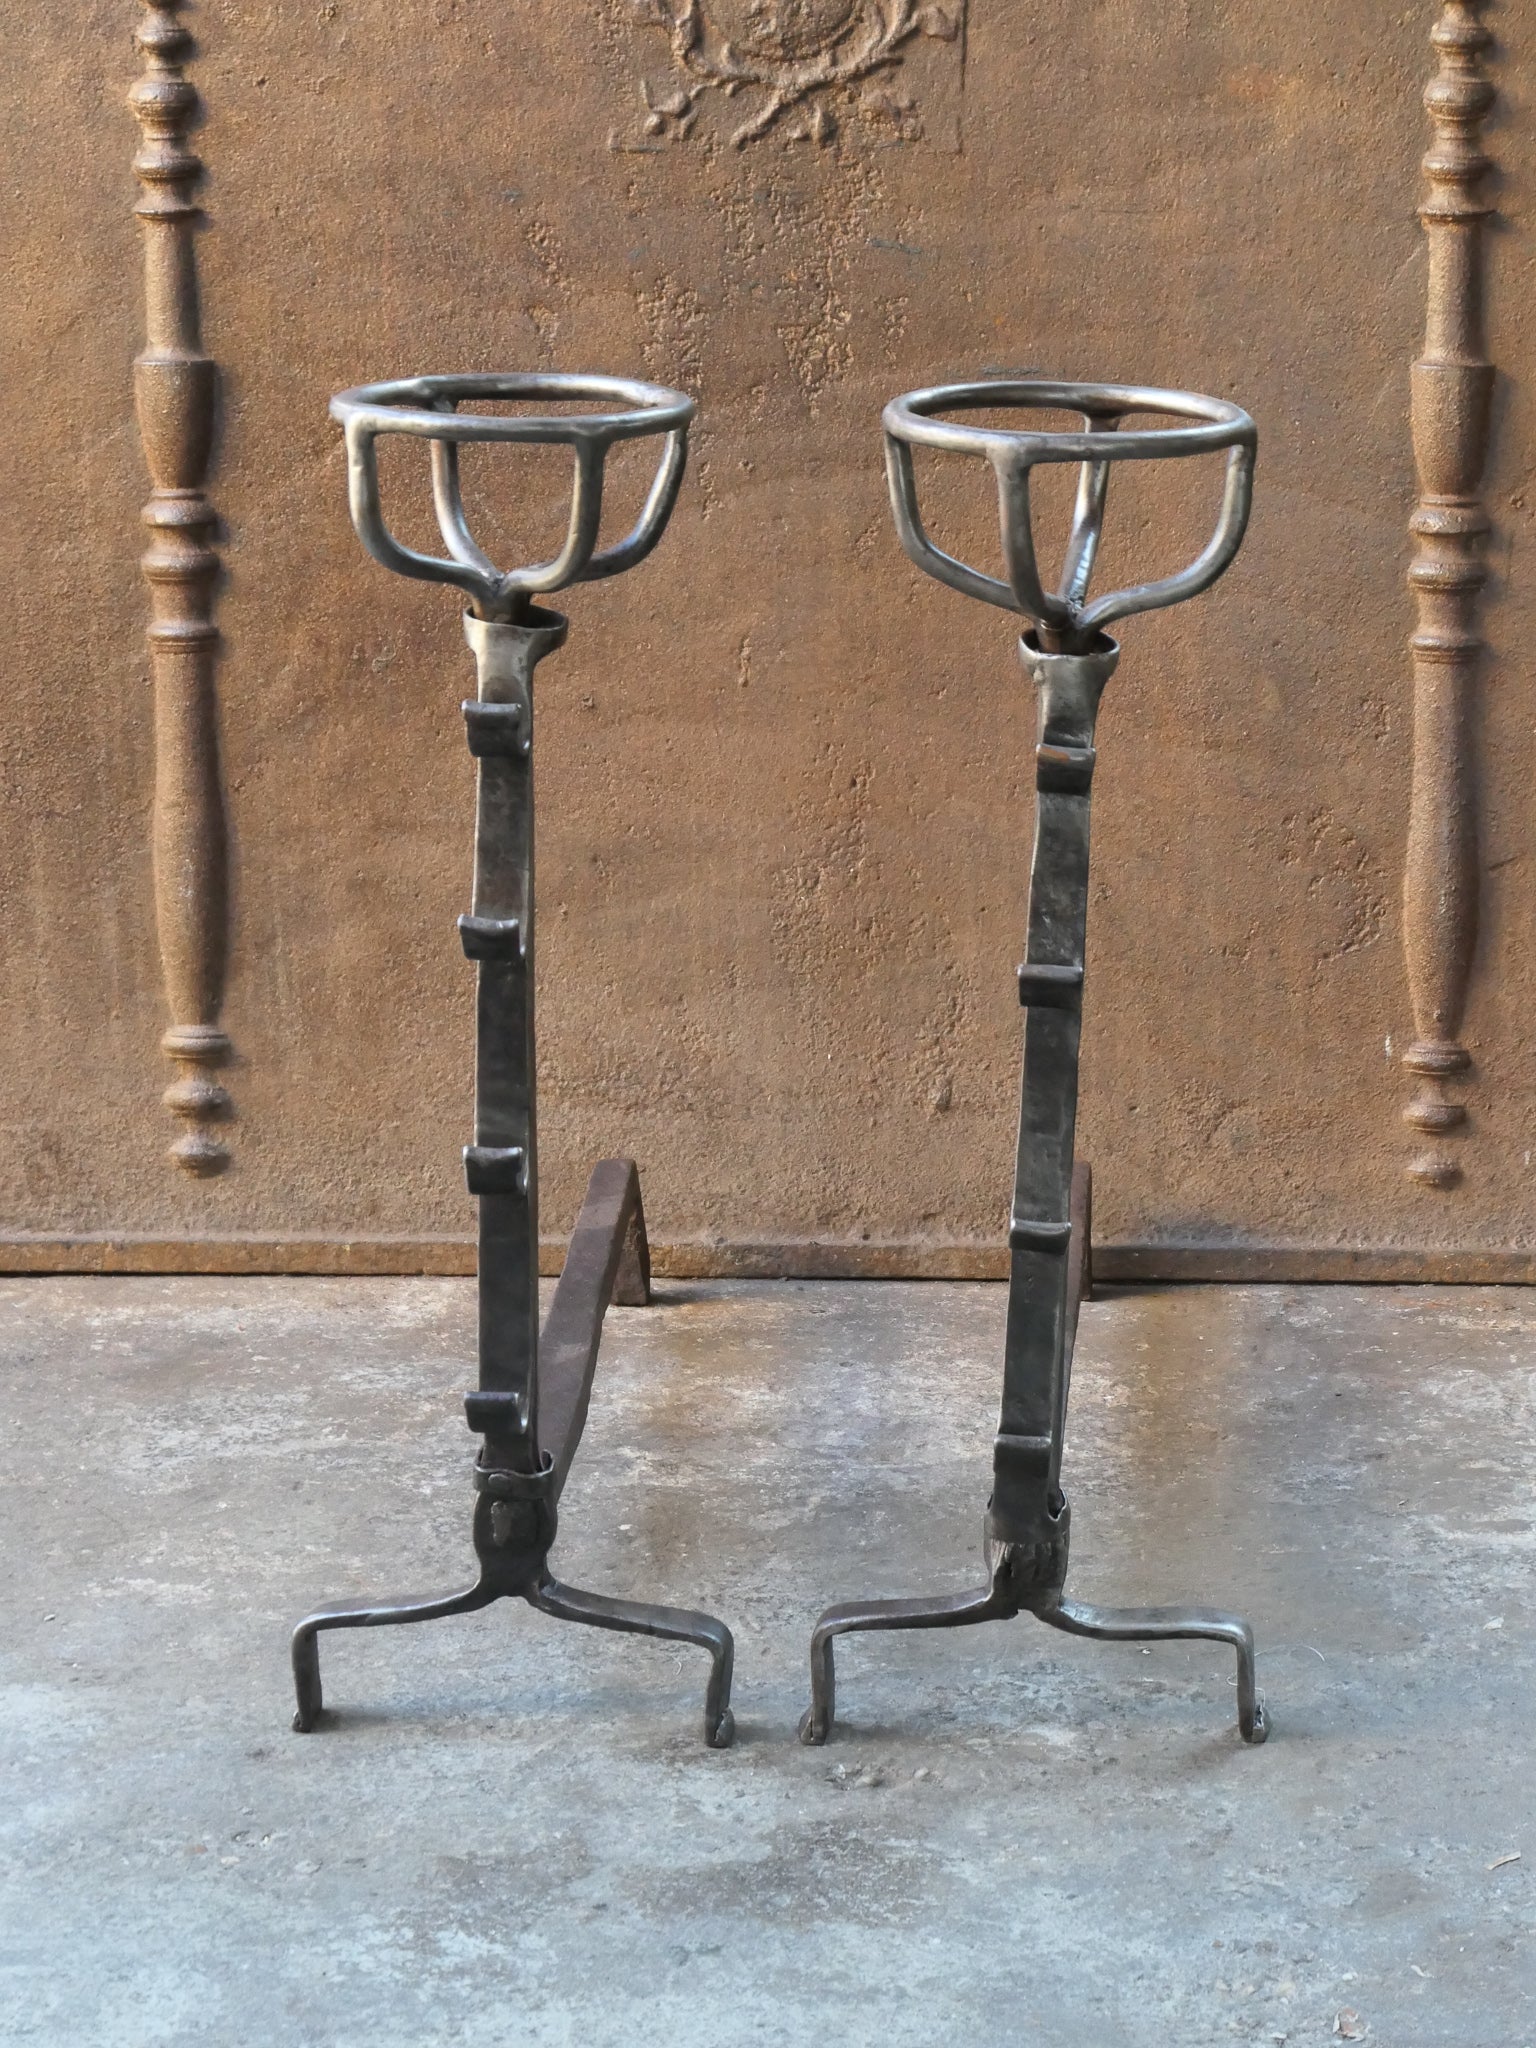 17th - 18th century French andirons - fire dogs made of wrought iron. These French andirons are called 'landiers' in France. This dates from the times the andirons were the main cooking equipment in the house. They had spit hooks to grill meat or